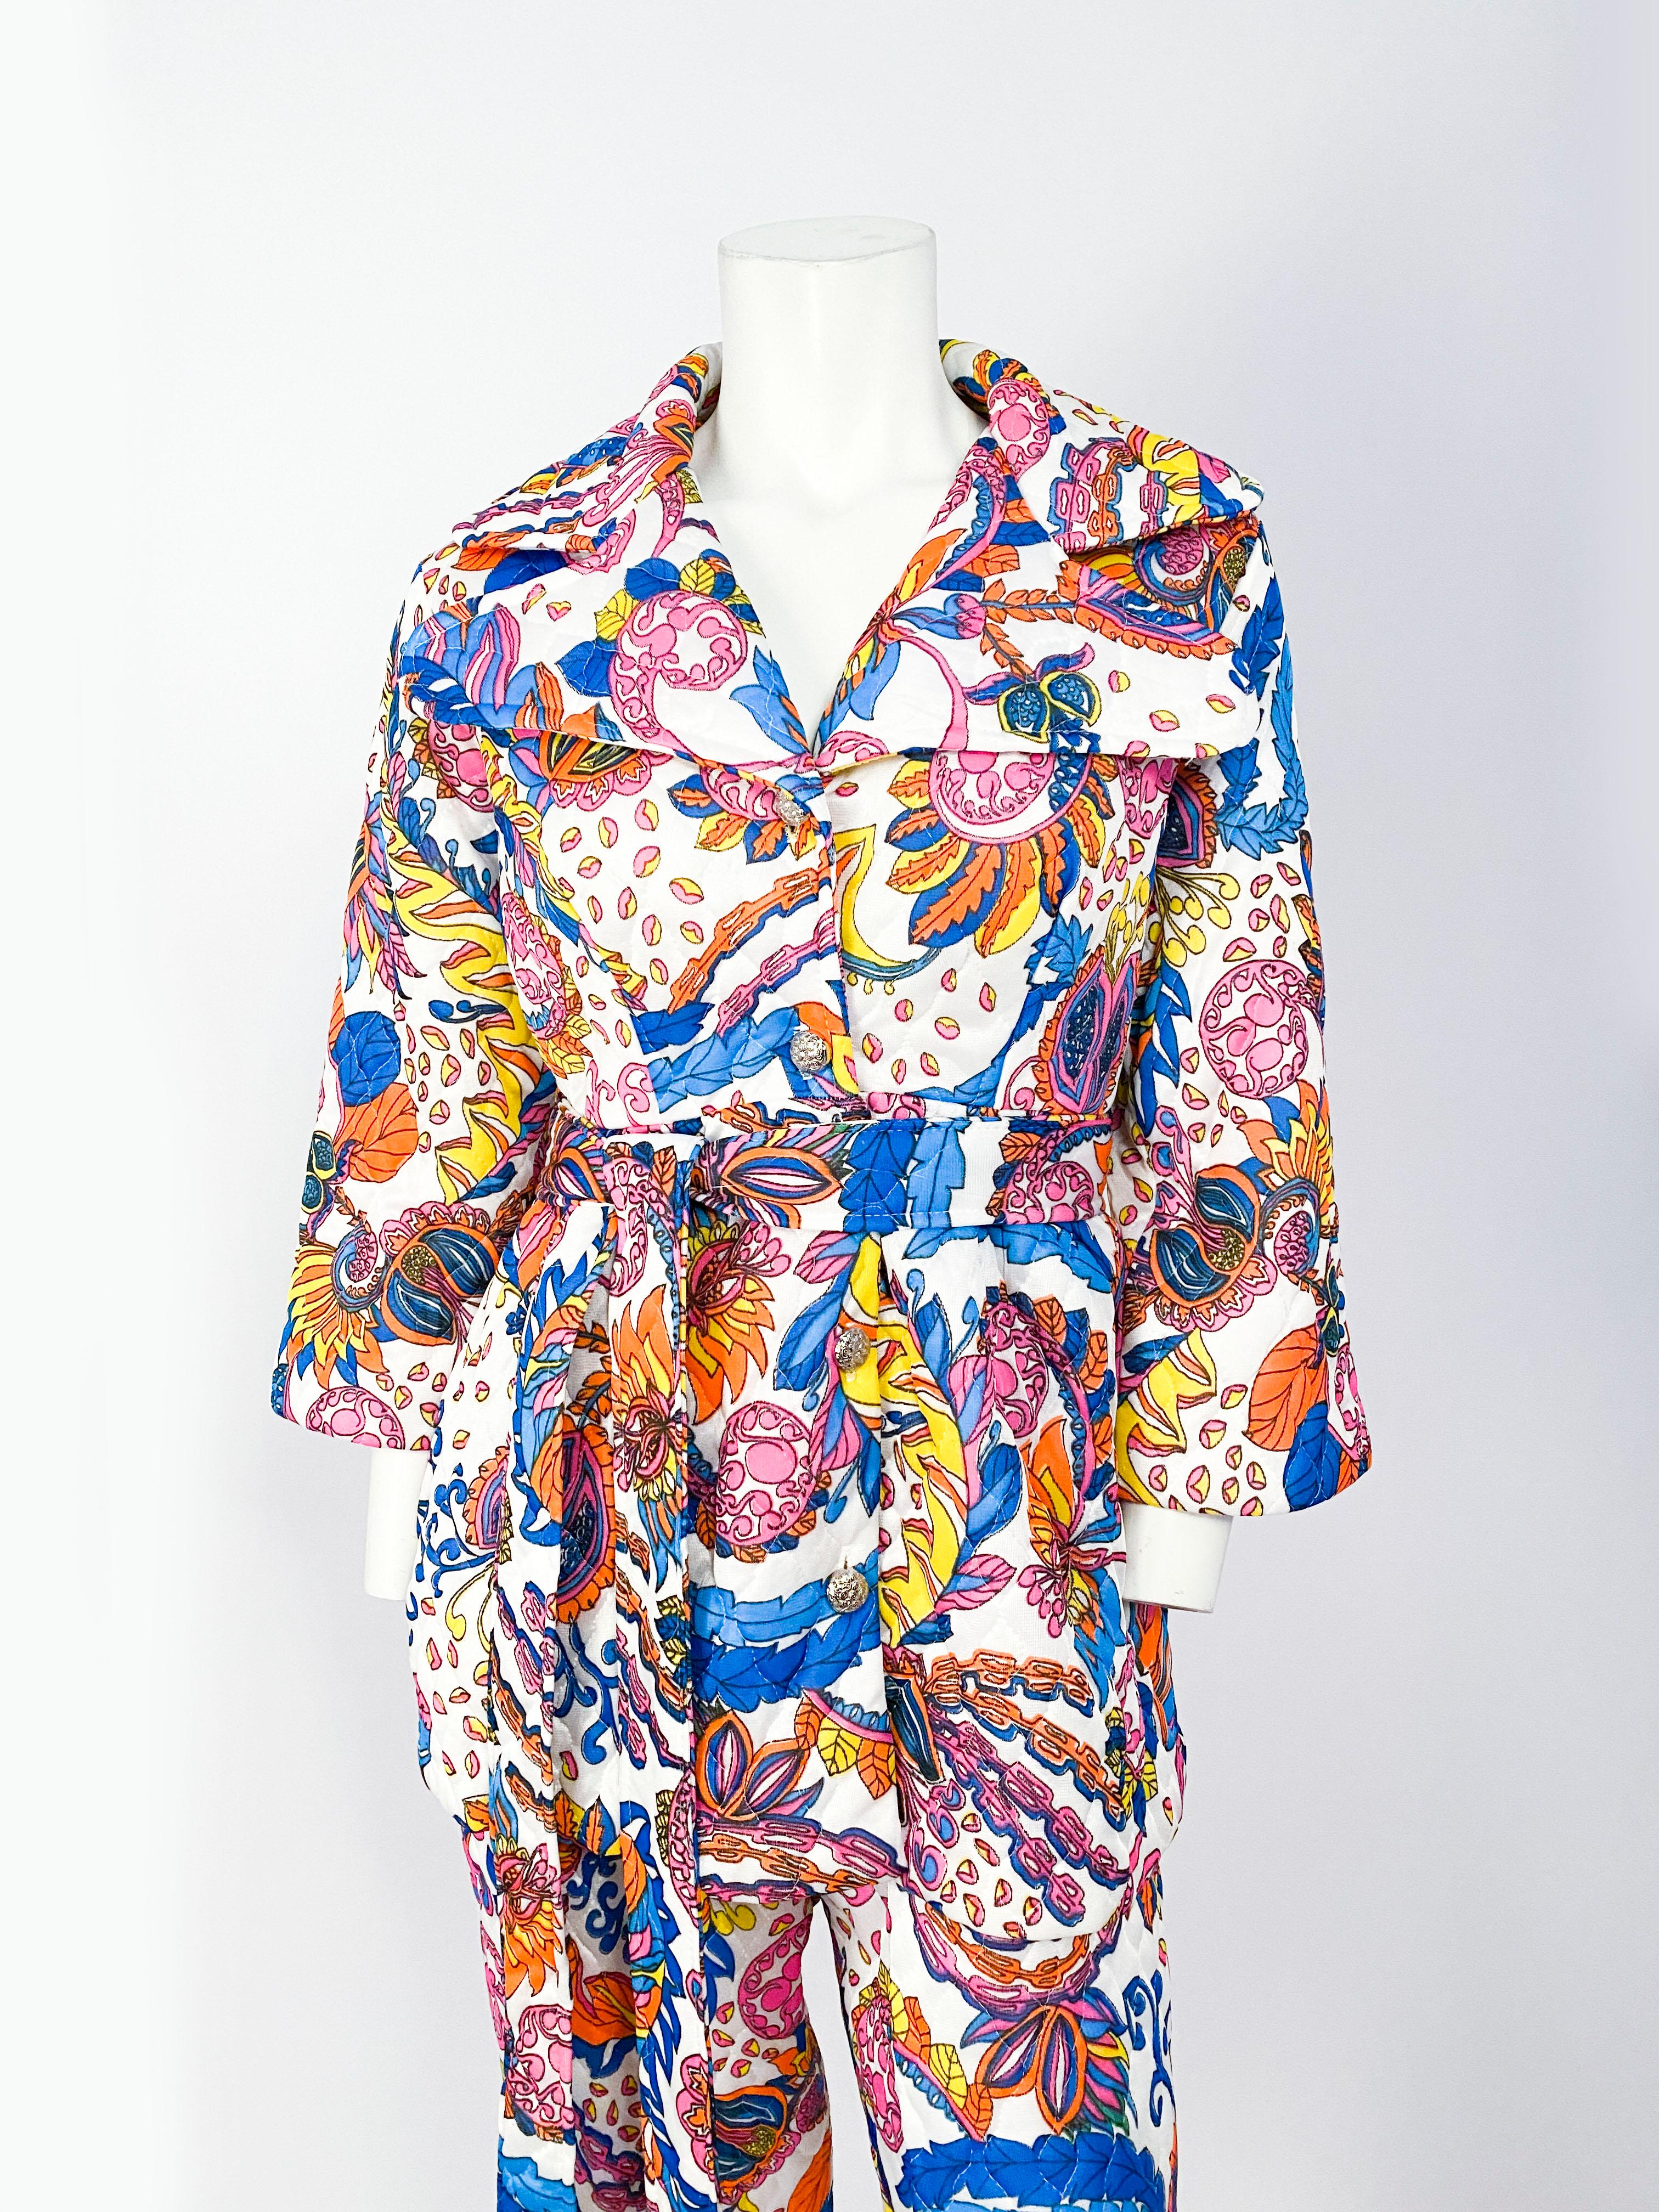 1970s printed polyester pant suit set (jacket, pants, & sash) featuring a psychedelic floral print in neon pinks, orange, blues, and yellows on a white back color. The jacket has a wide flared hem, hidden pockets, metallic buttons, and an enlarged